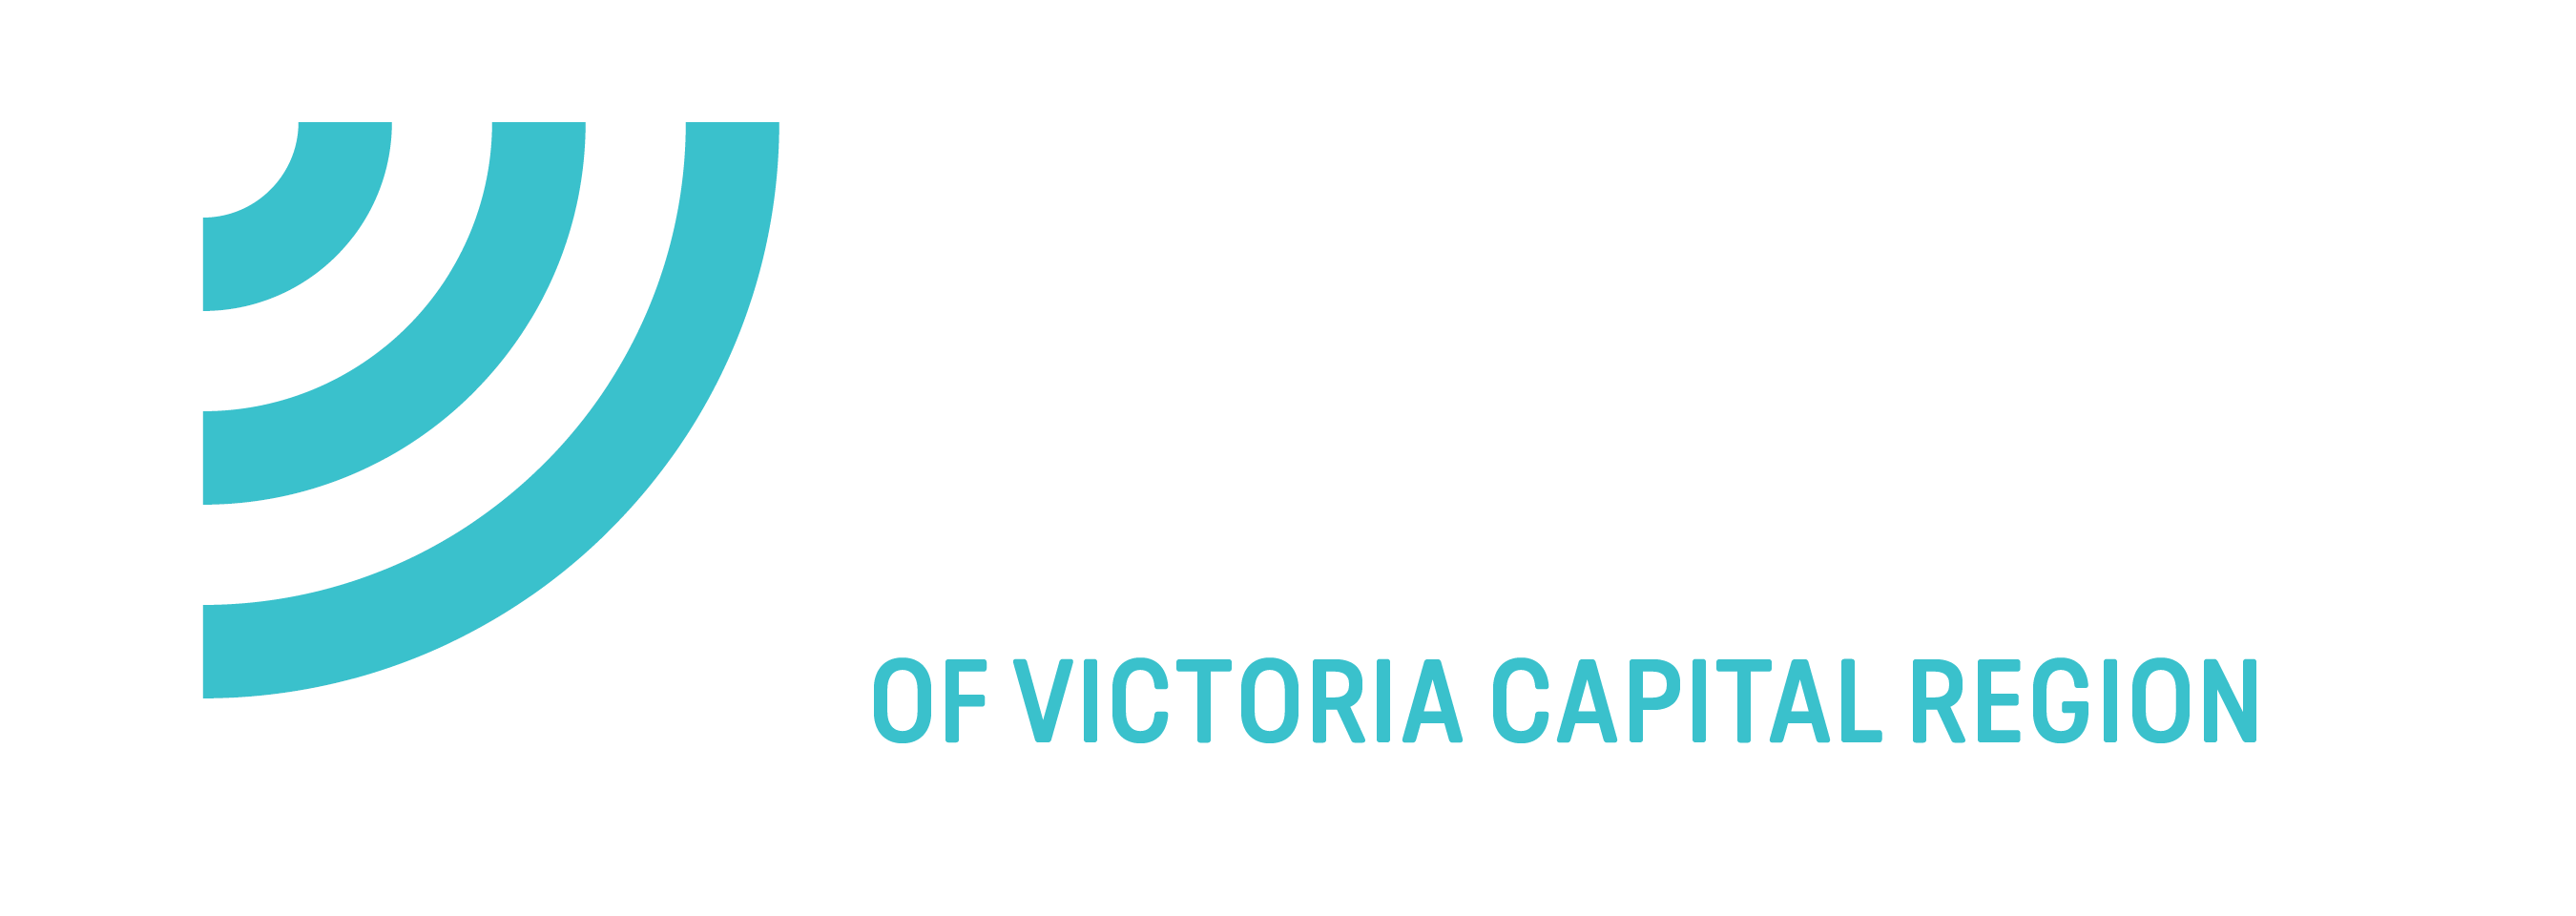 Reference from Family Member or Partner/Significant Other - Big Brothers Big Sisters of Victoria Capital Region